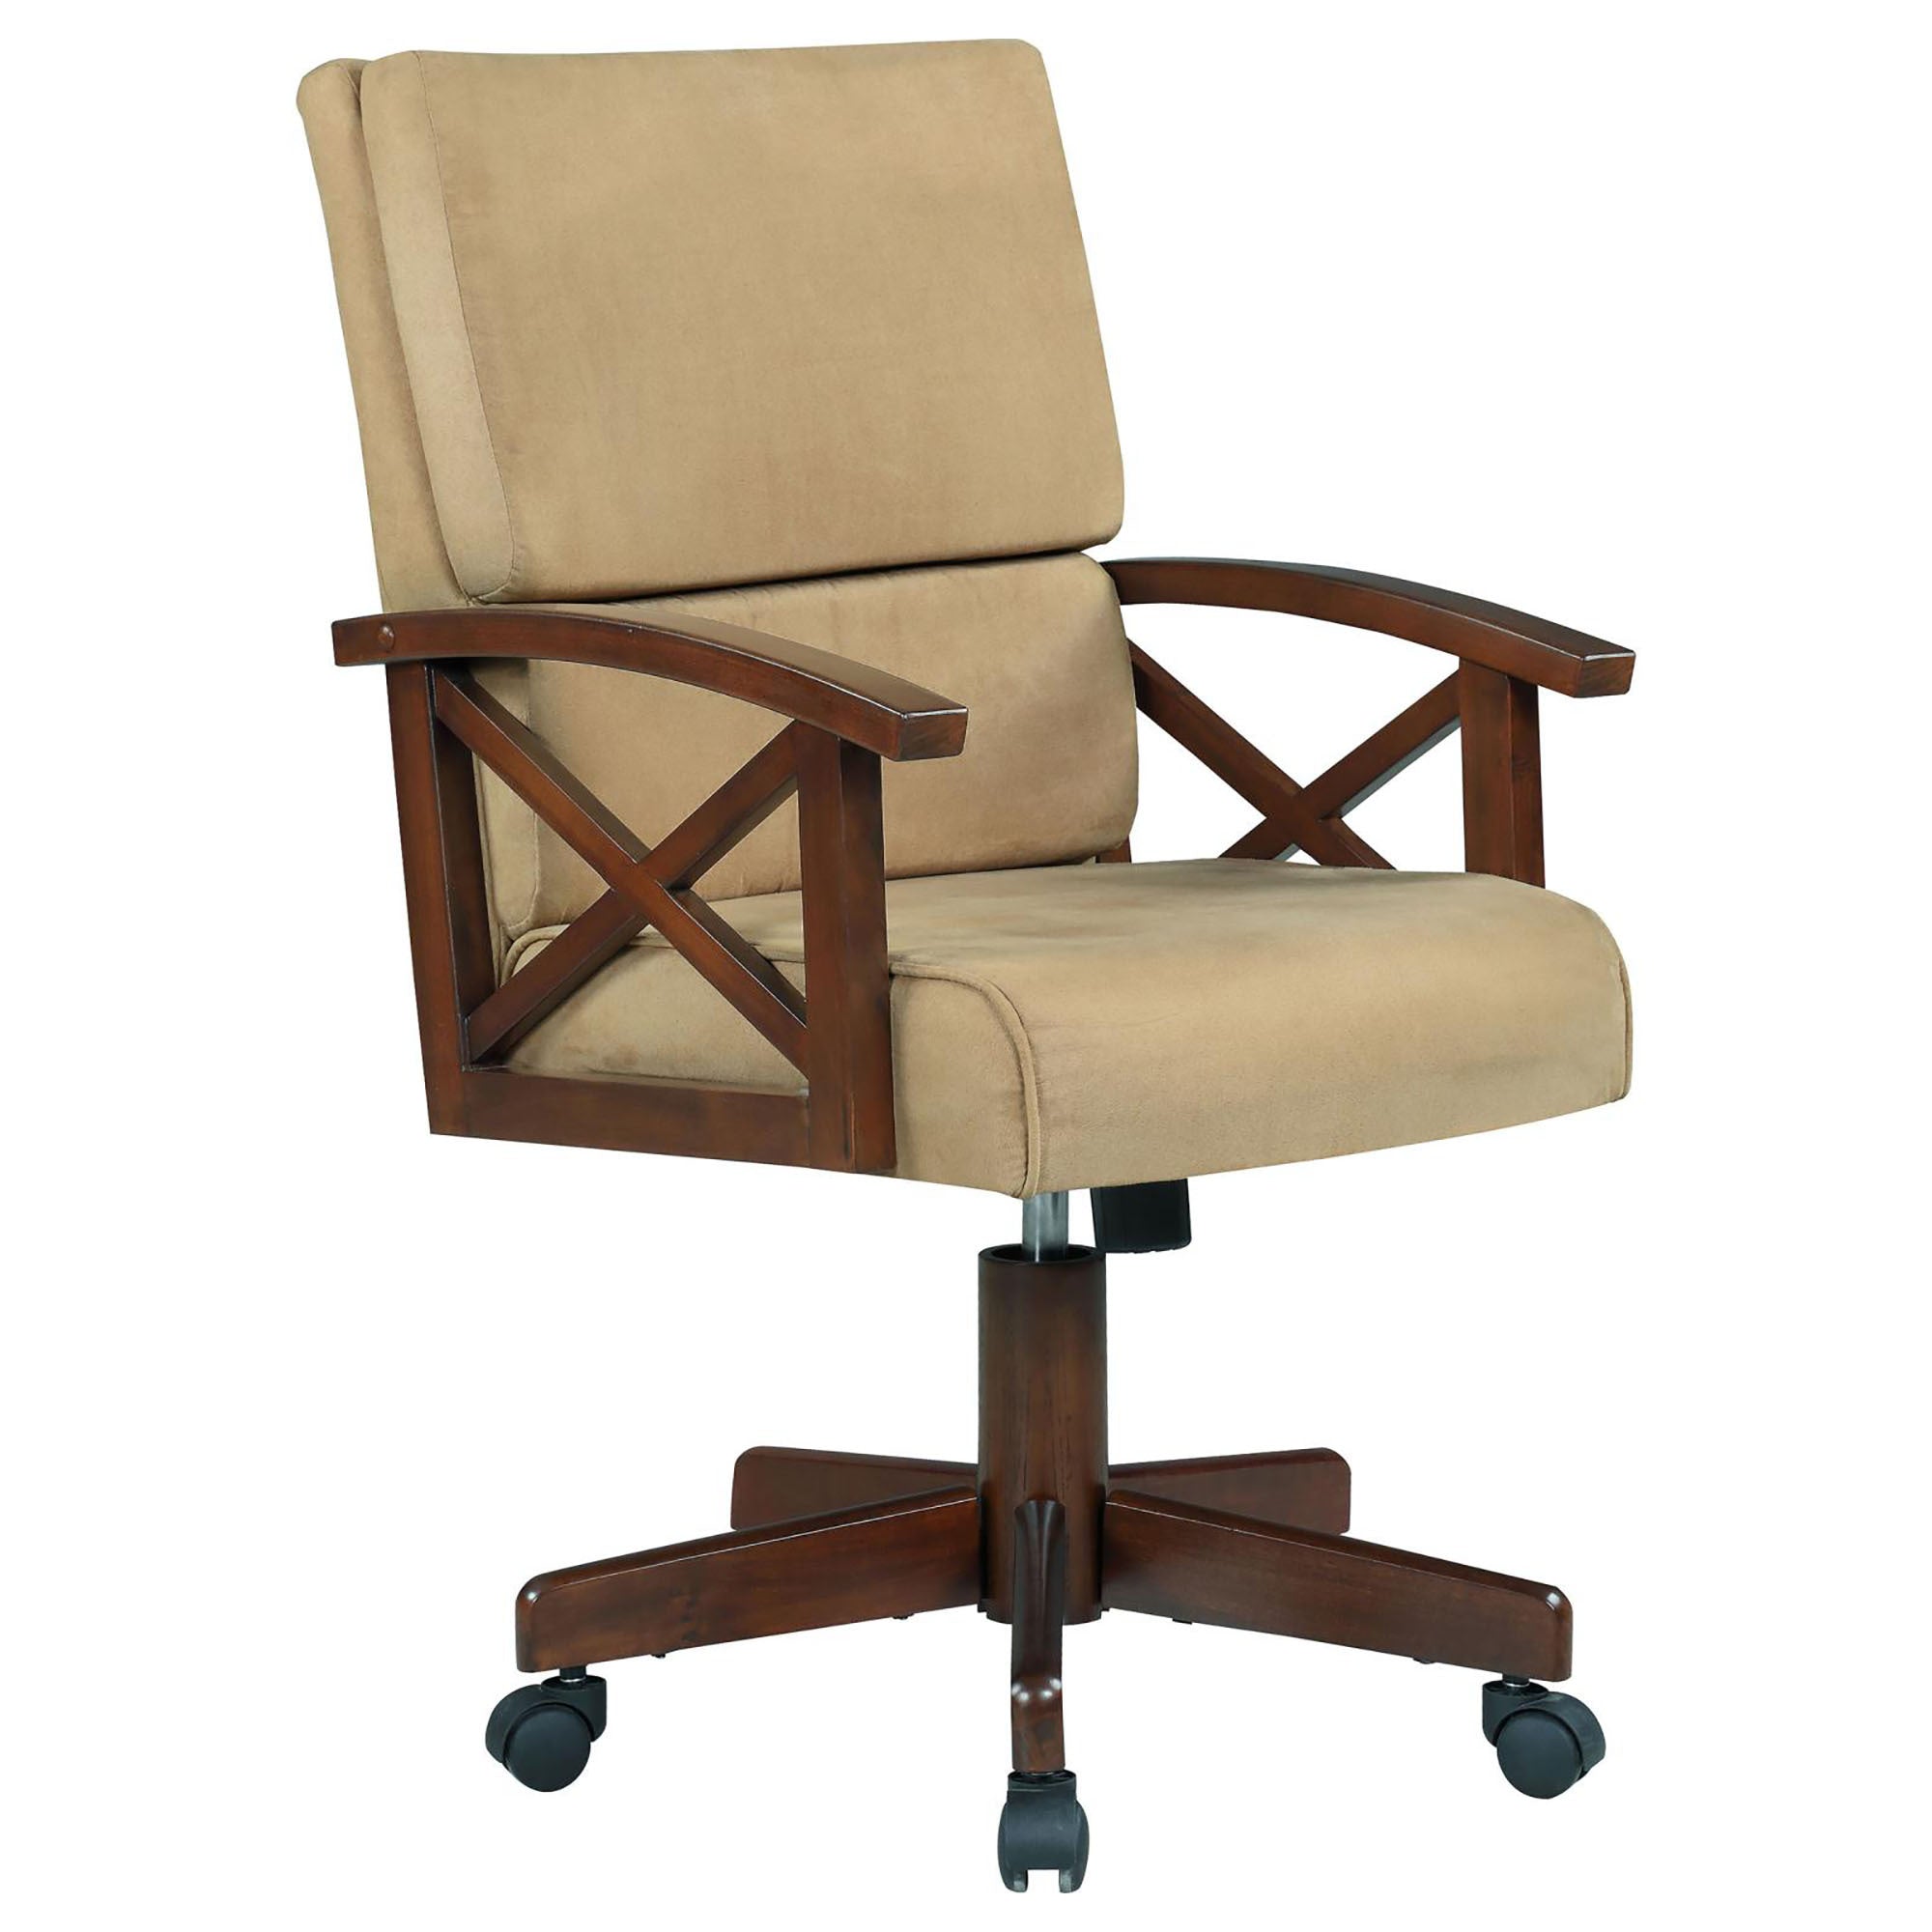 Tan and Tobacco Upholstered Game Chair with